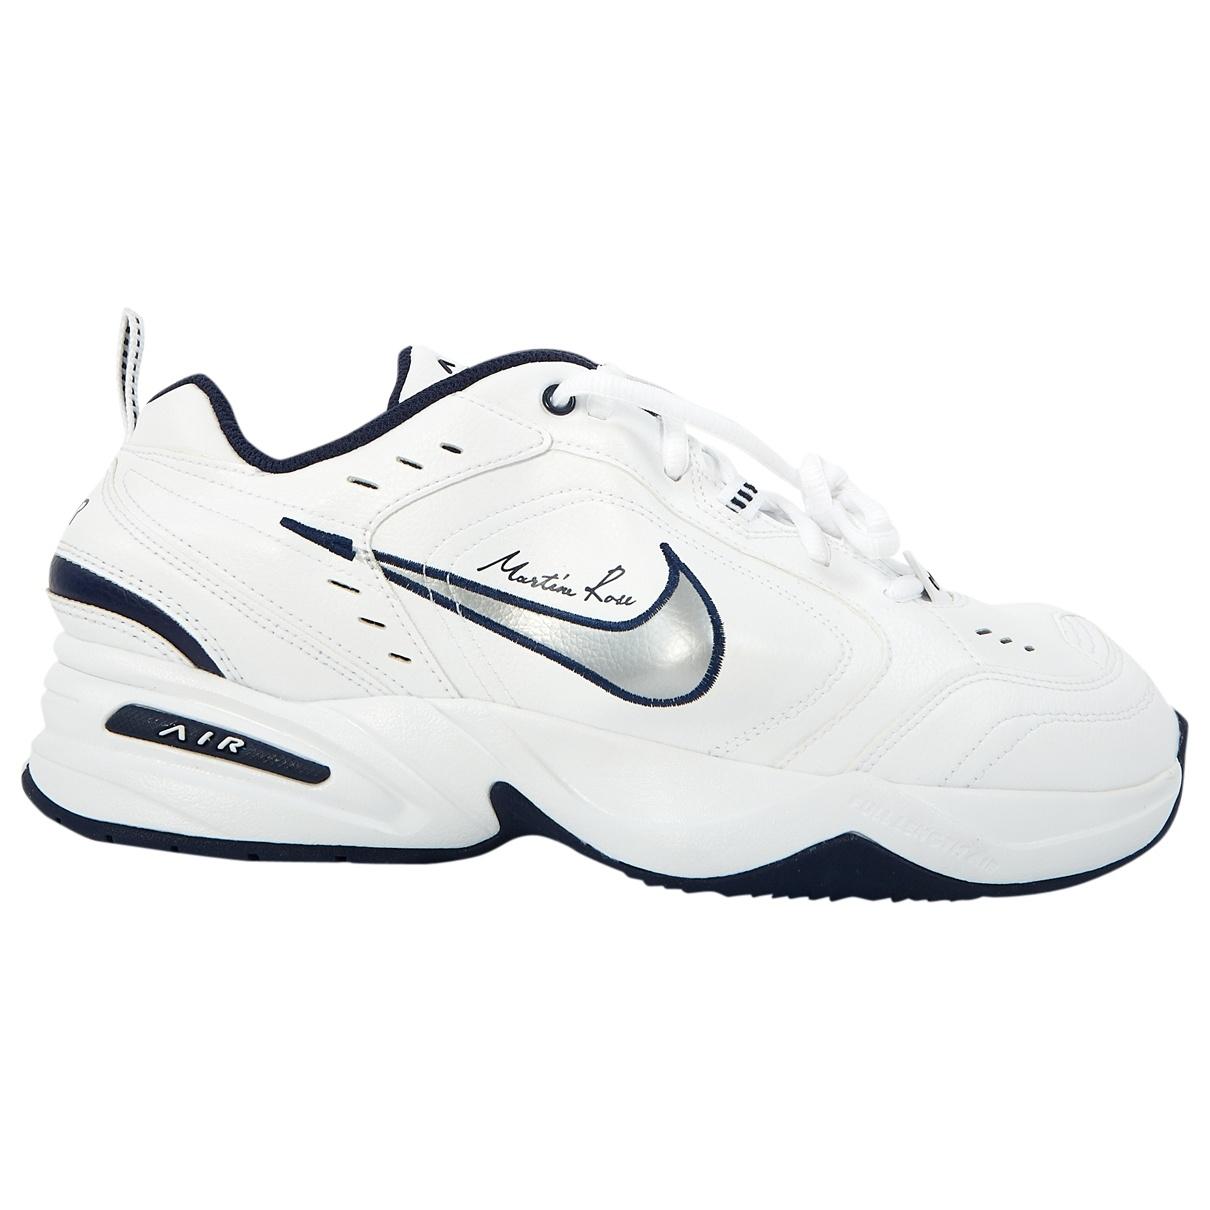 Lyst - Nike Air Monarch White Leather Trainers in White for Men